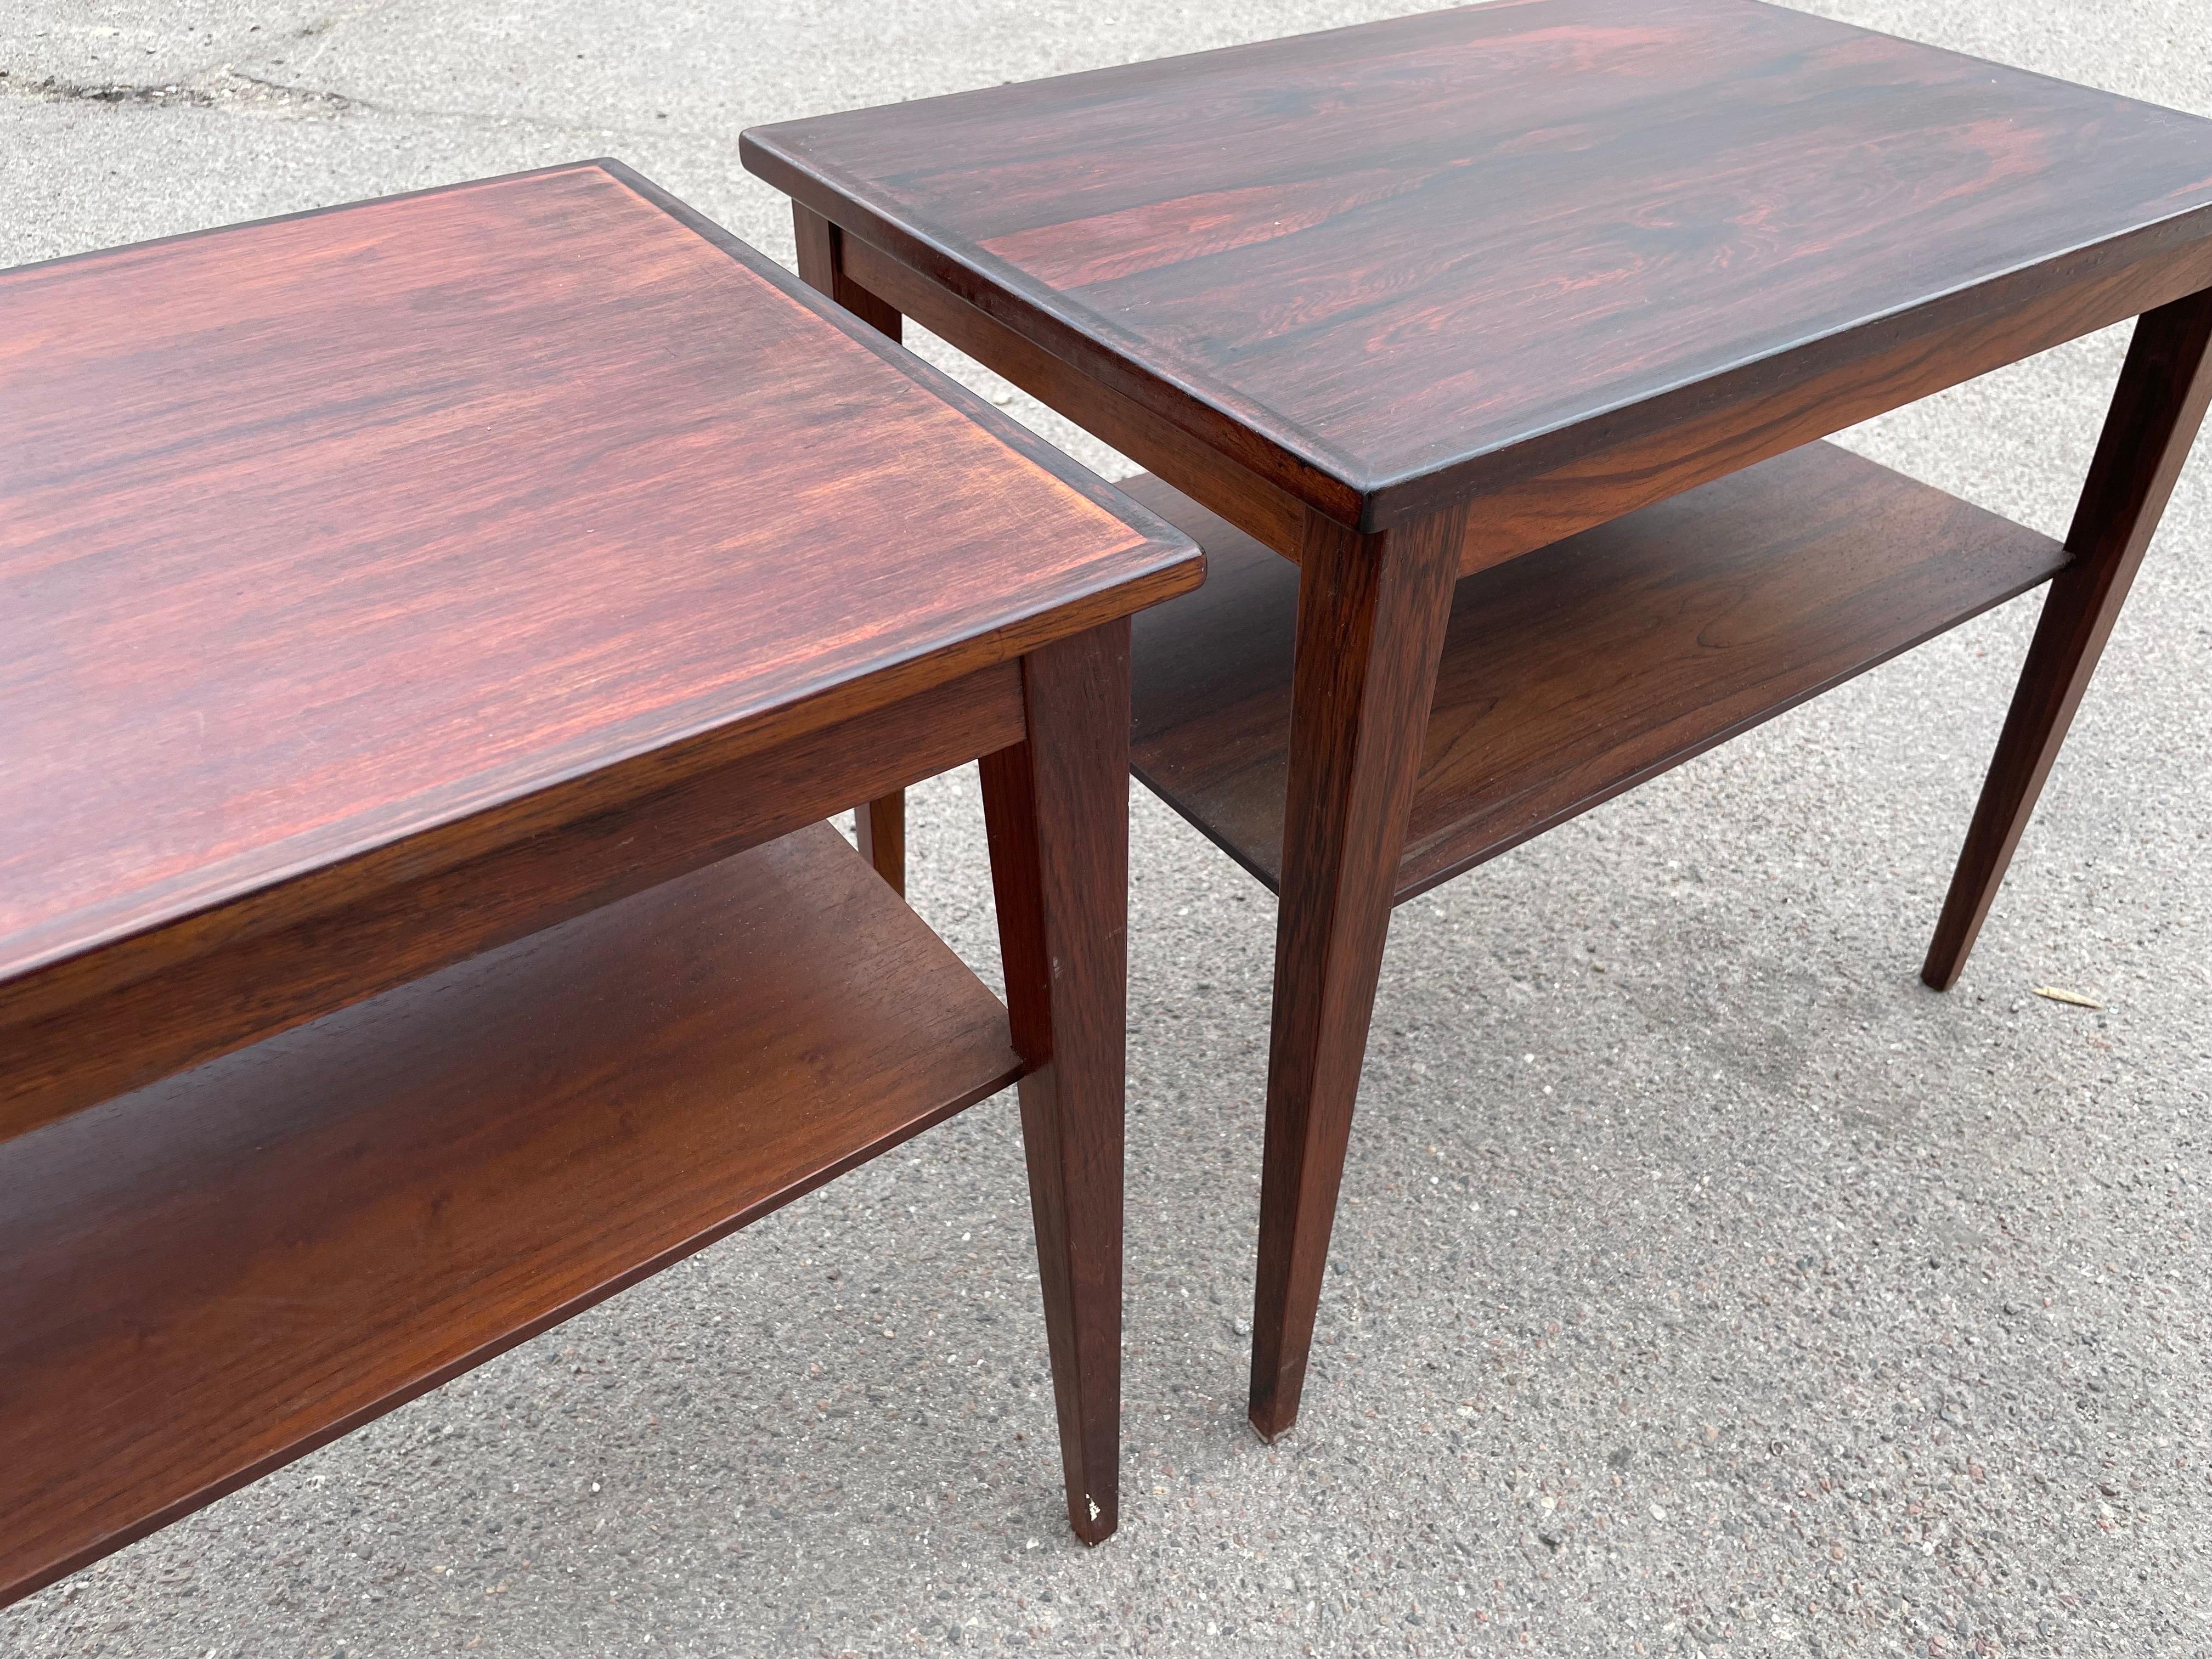 Pair of Danish Mid-Century Modern Nightstands or Sidetables from the, 1960s For Sale 4